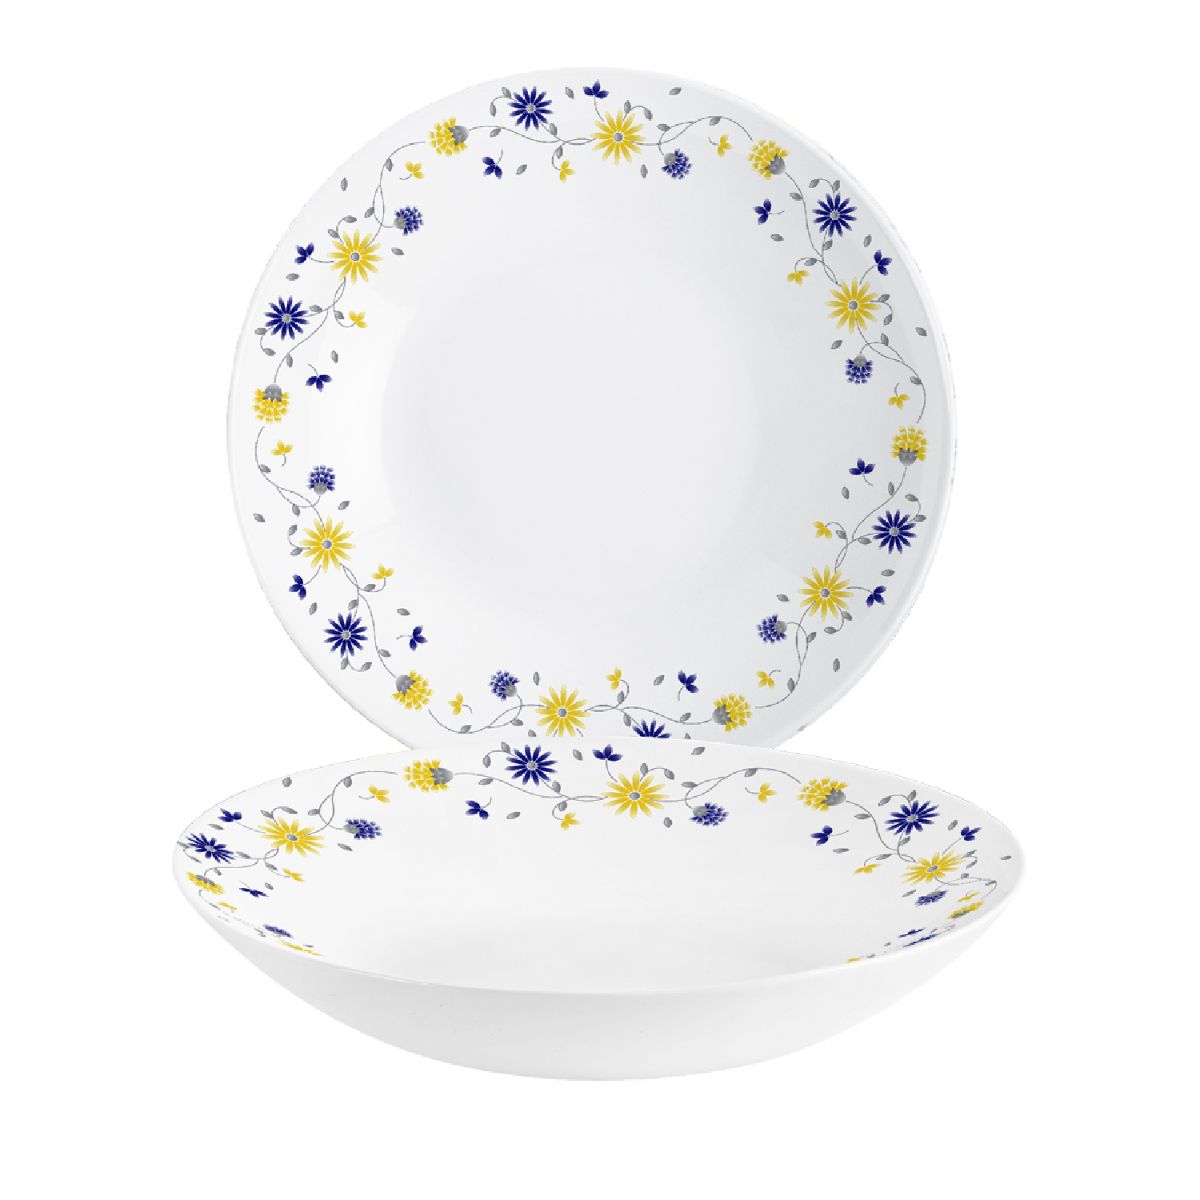 Royale Series Soupy Noodle Gift Set, 2 Pieces Blooming Daisy / 2 Pieces